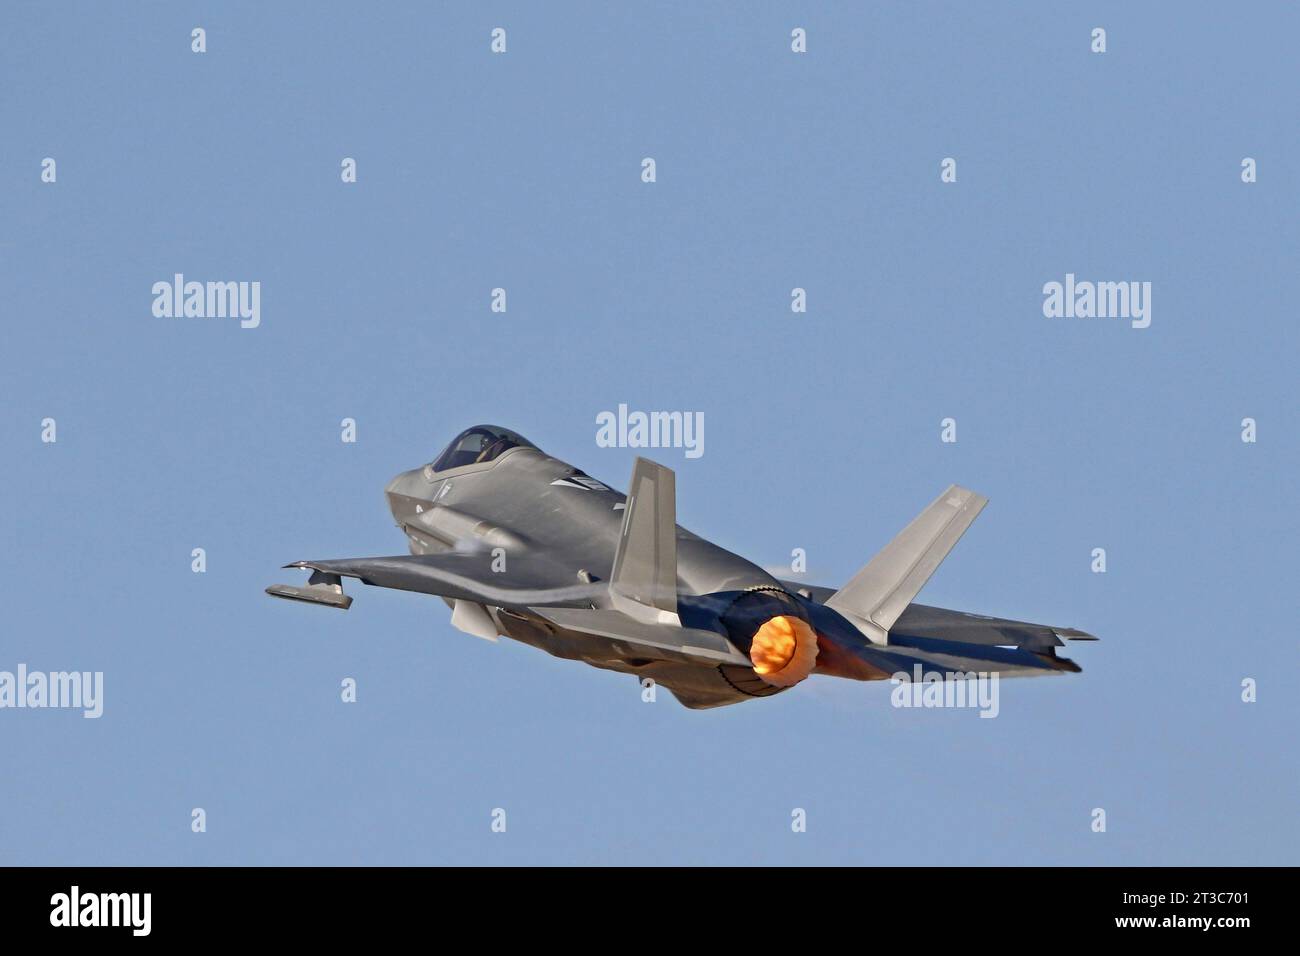 F-35 Adir of the Israeli Air Force taking off. Stock Photo